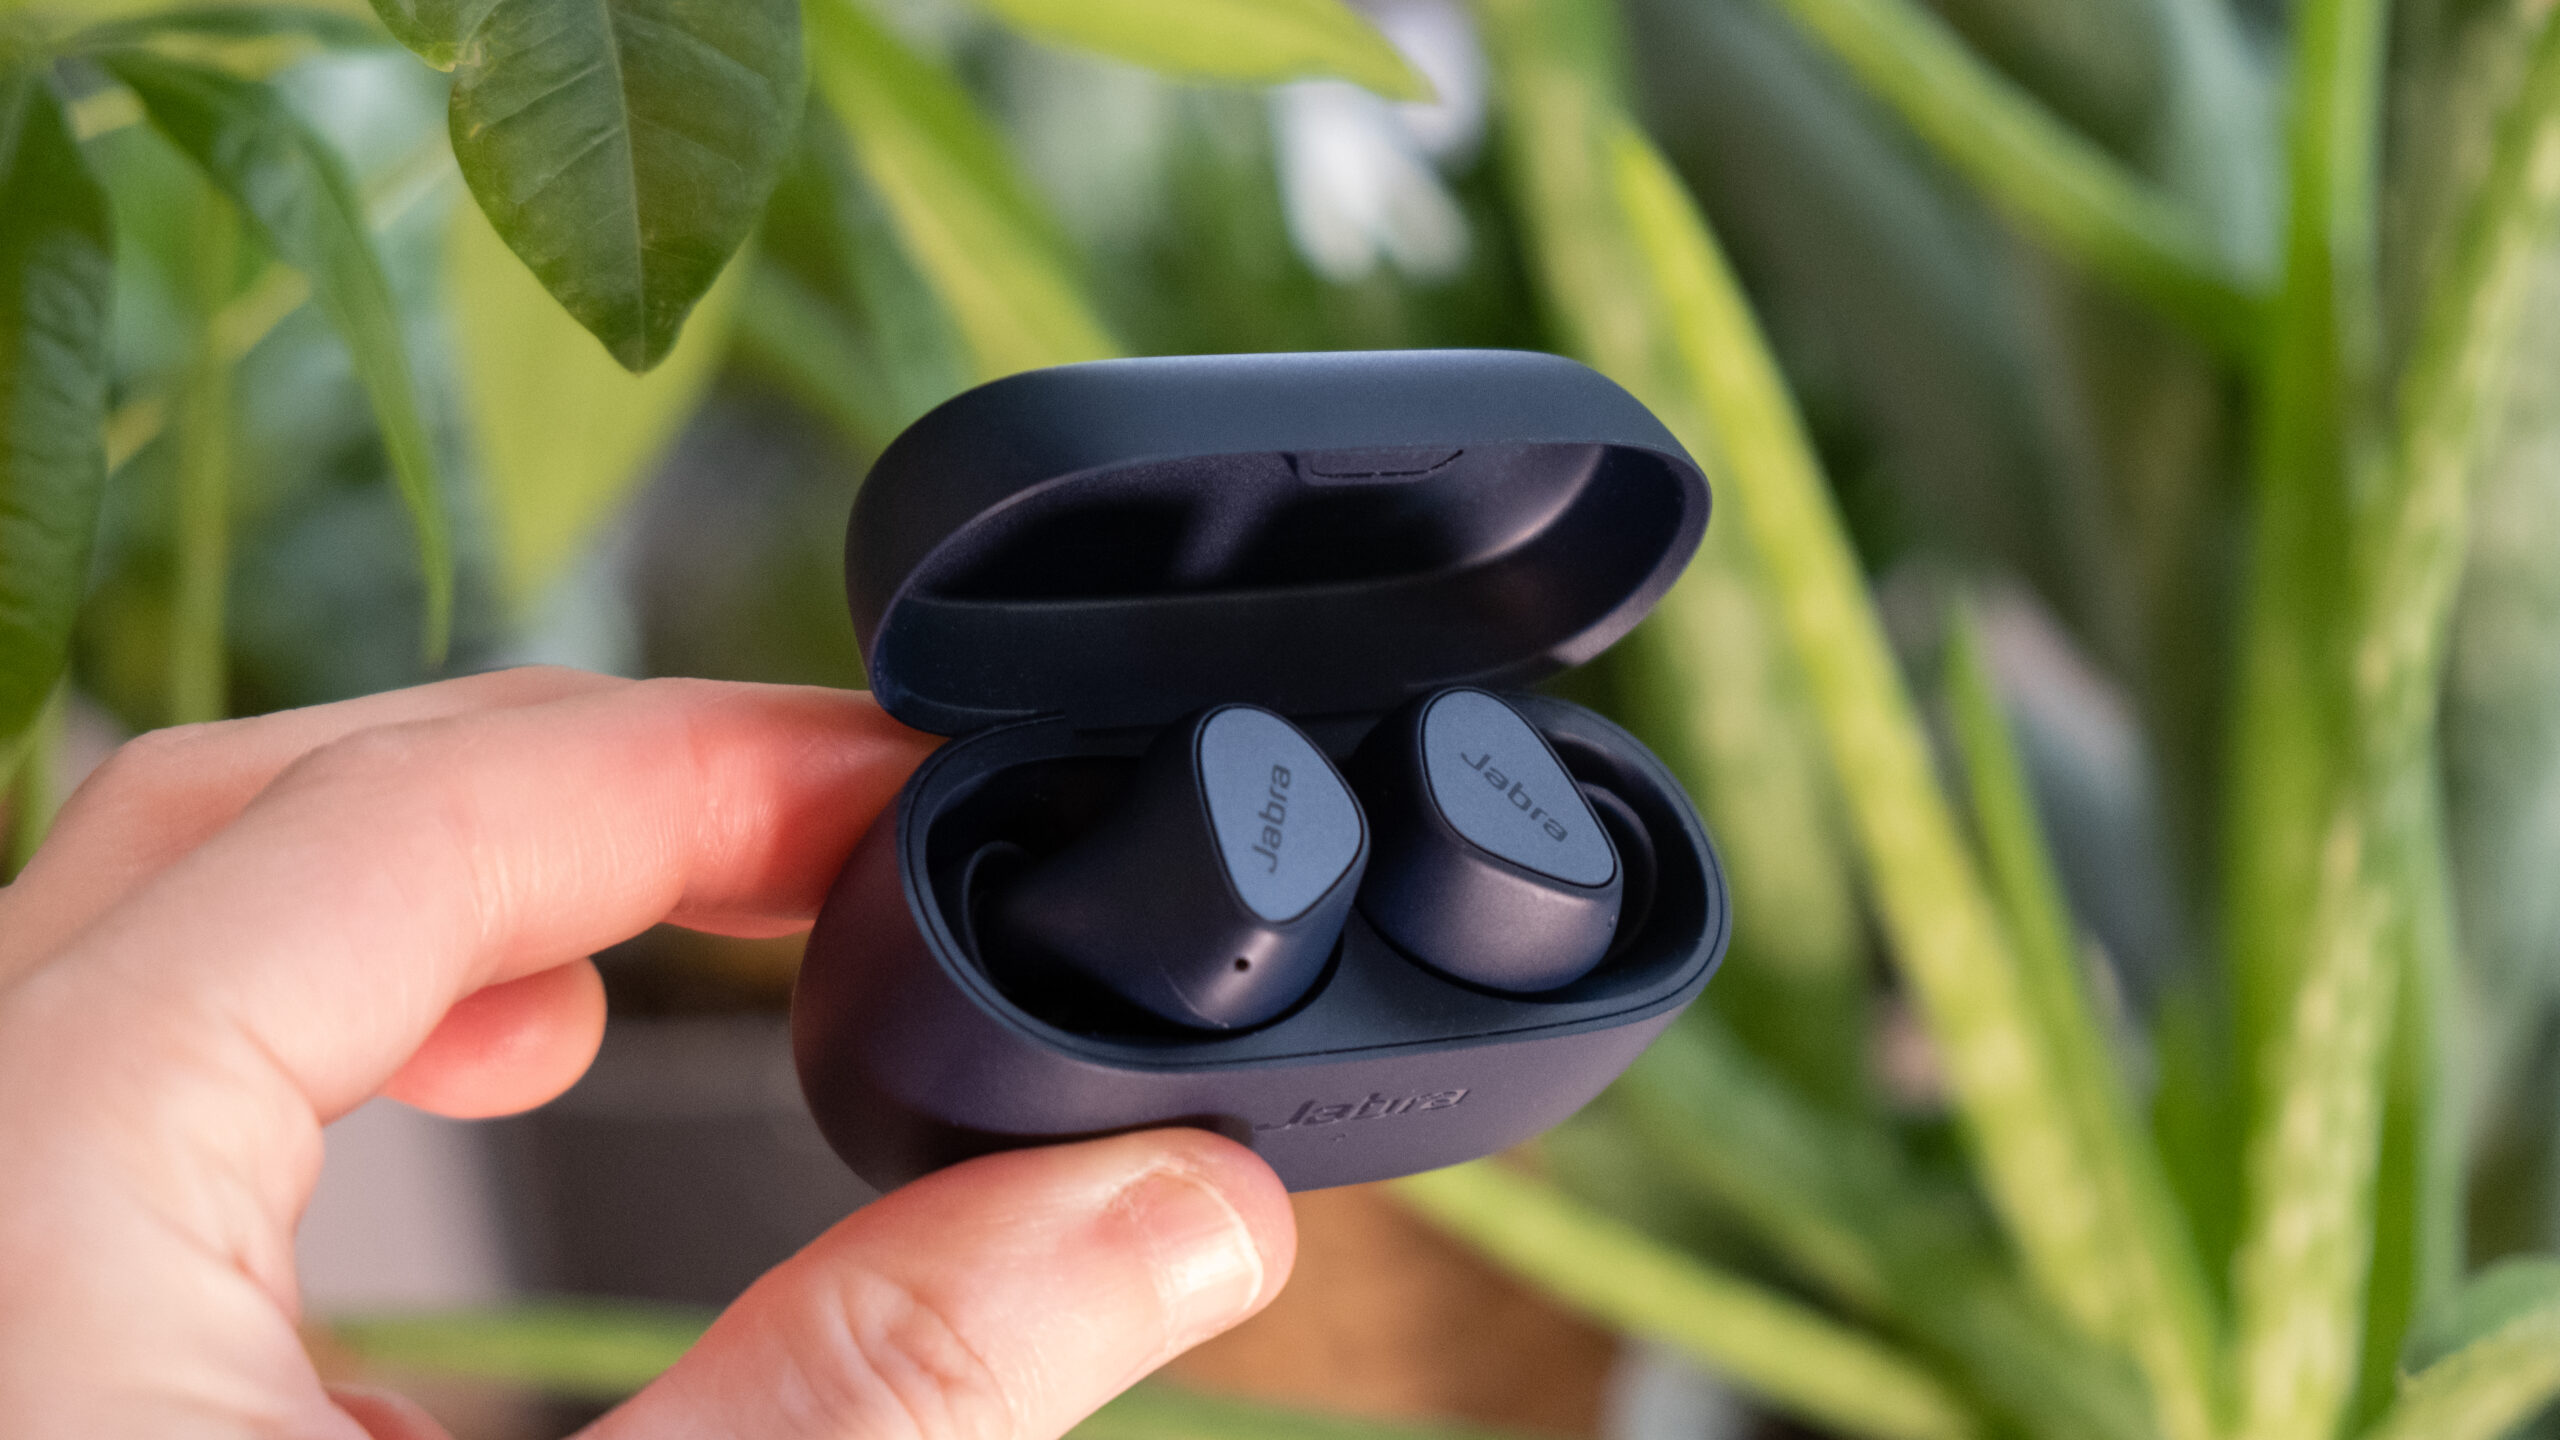 A hand holds the Jabra Elite 4 open in front of green foliage.